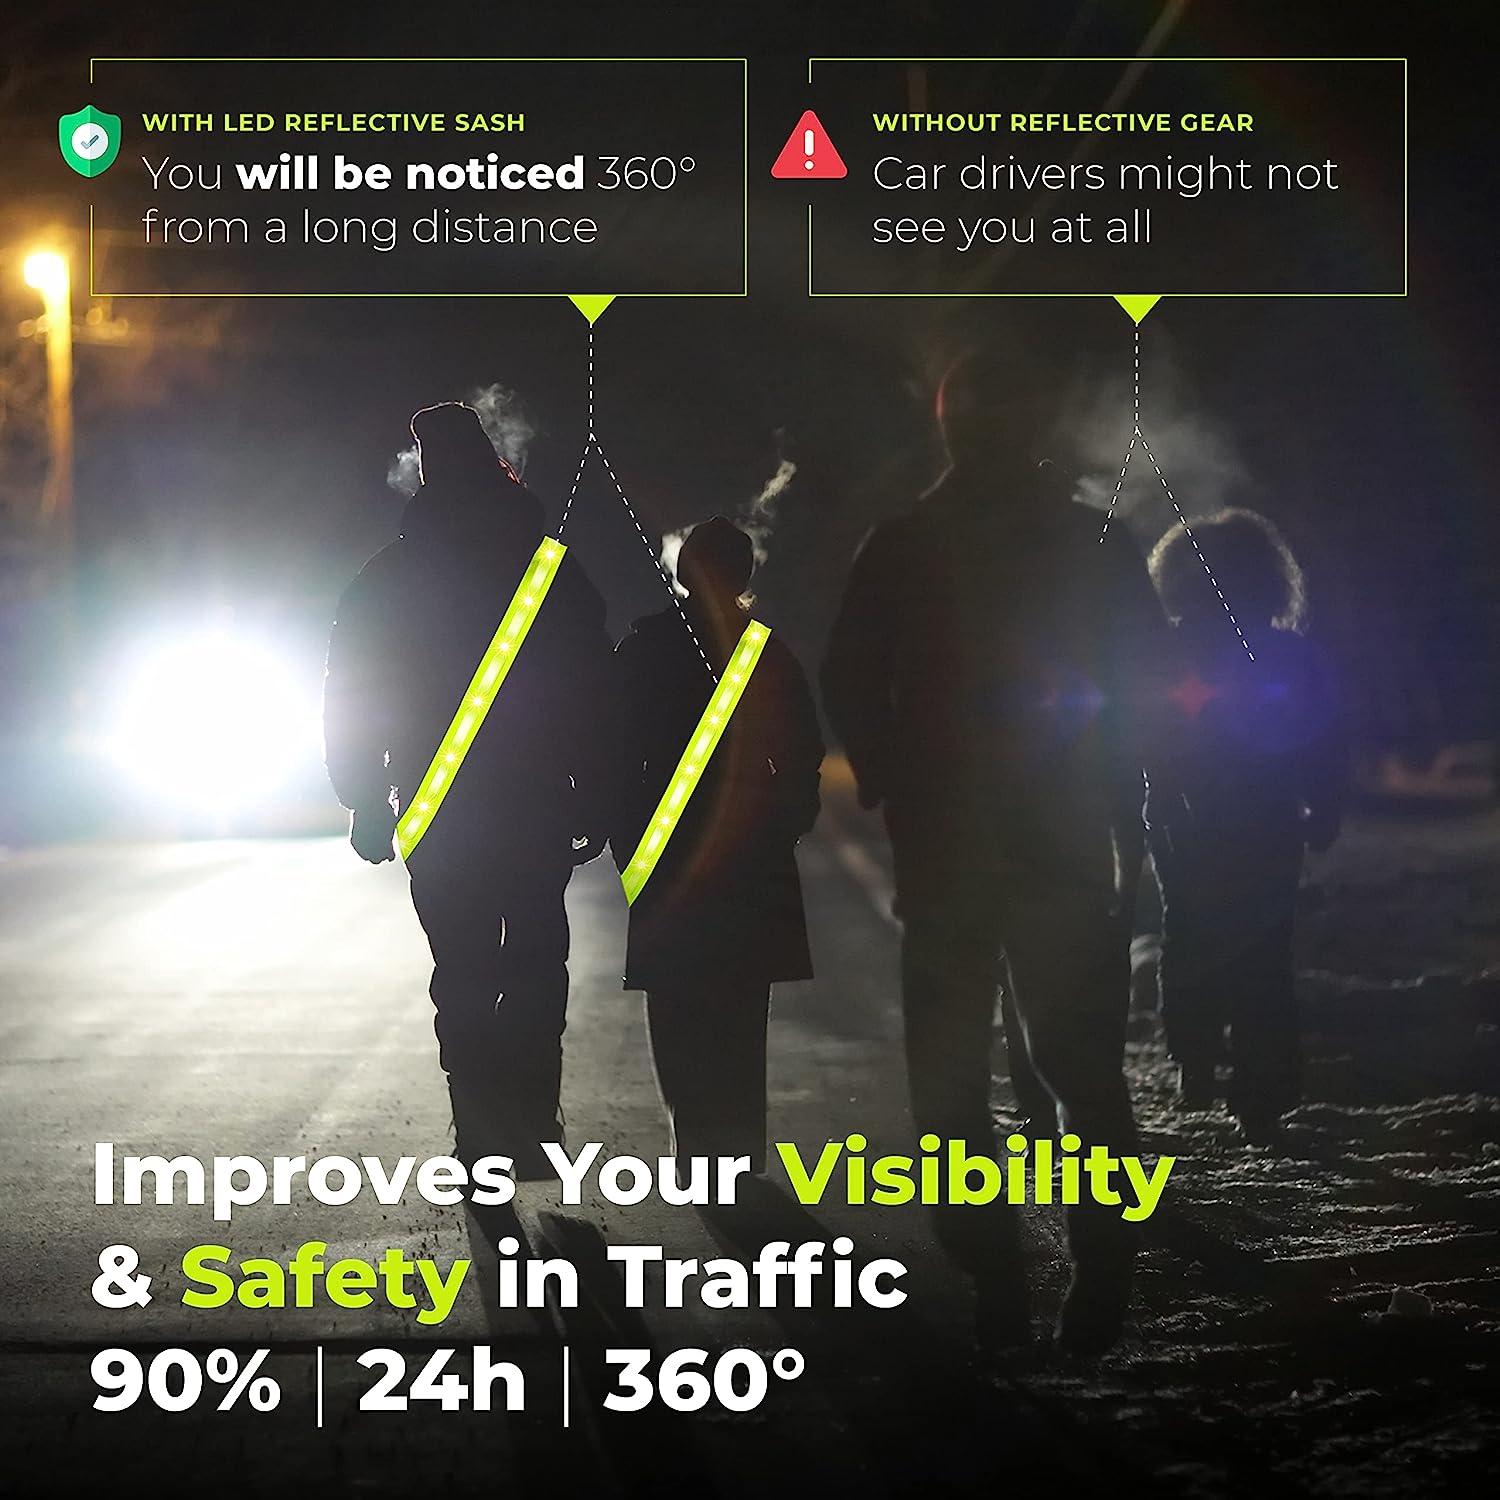 NordicFlows LED Reflective Sash, Rechargeable Led Reflective Lighted Vest  for Walking in The Dark, Night Dog Walking Gear, Fluorescent Yellow Reflector  Vests, Reflective Running Gear for Dog Walking